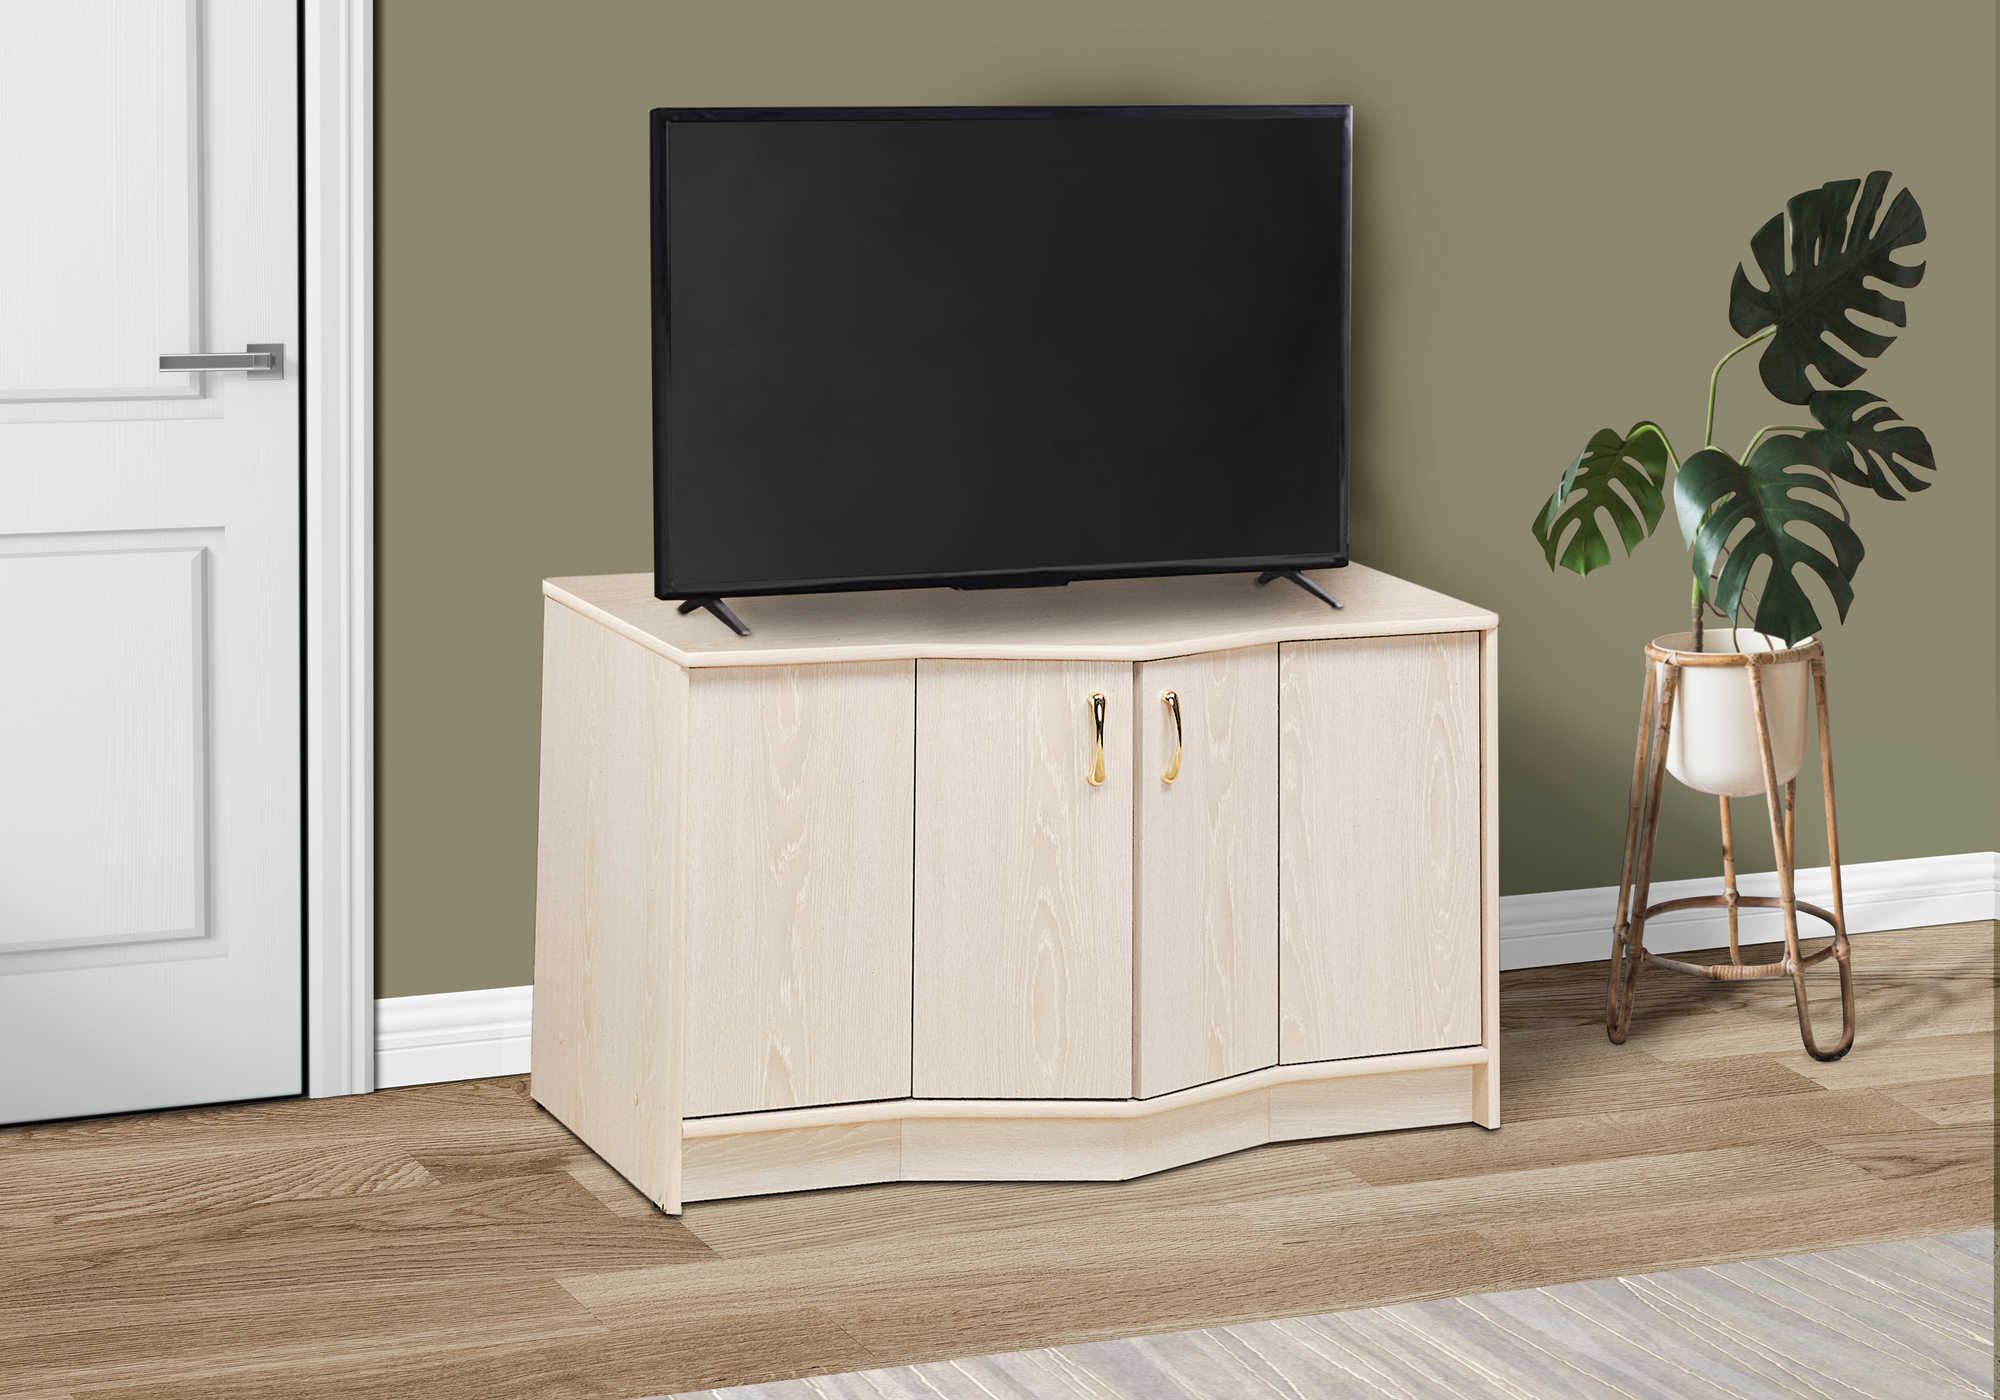 TV STAND - WASHED OAK HOME THEATER TV STAND / 36"TV